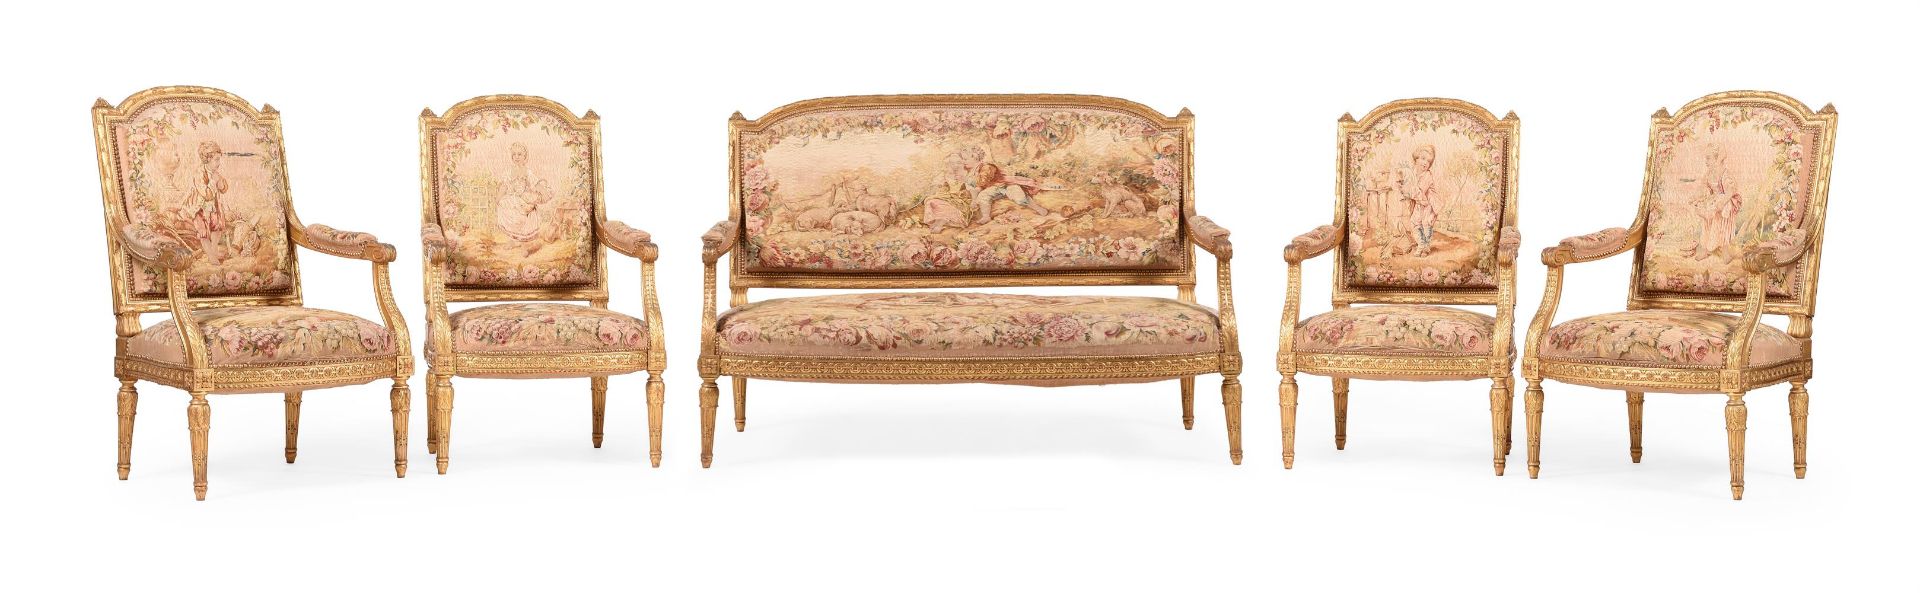 A FRENCH TRANSITIONAL AUBUSSON UPHOLSTERED GILTWOOD SALON SUITE, IN LOUIS XVI STYLE